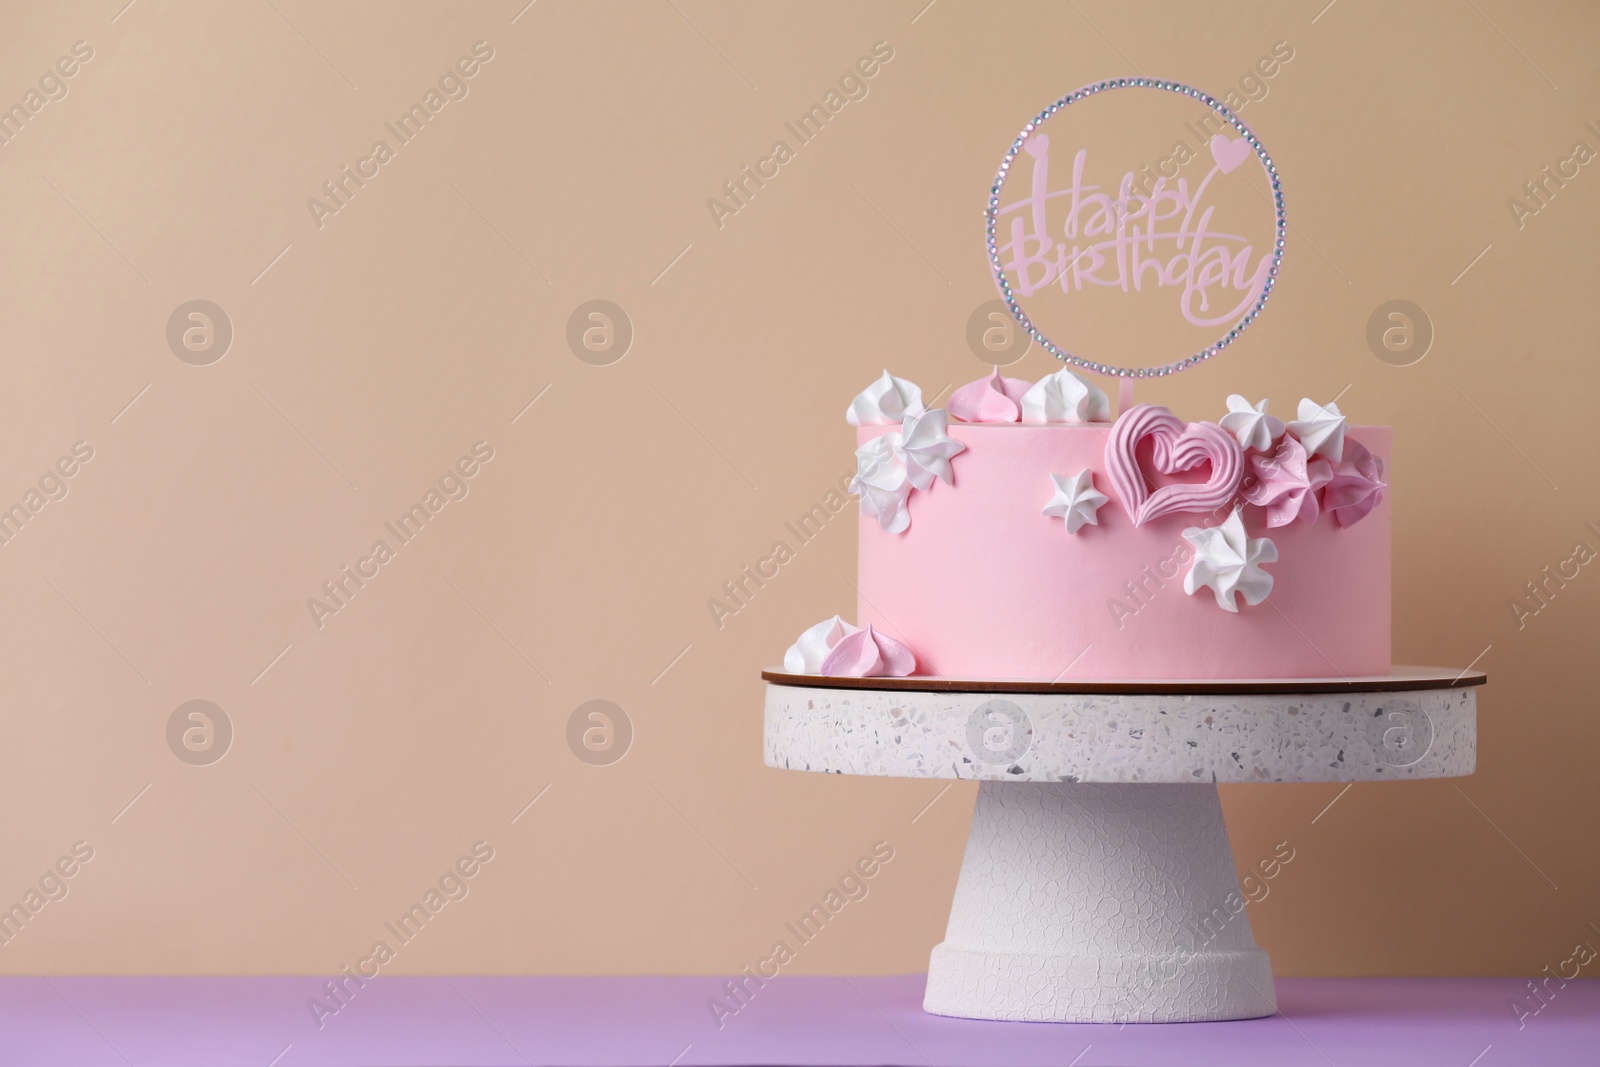 Photo of Beautifully decorated birthday cake on violet table near beige wall, space for text